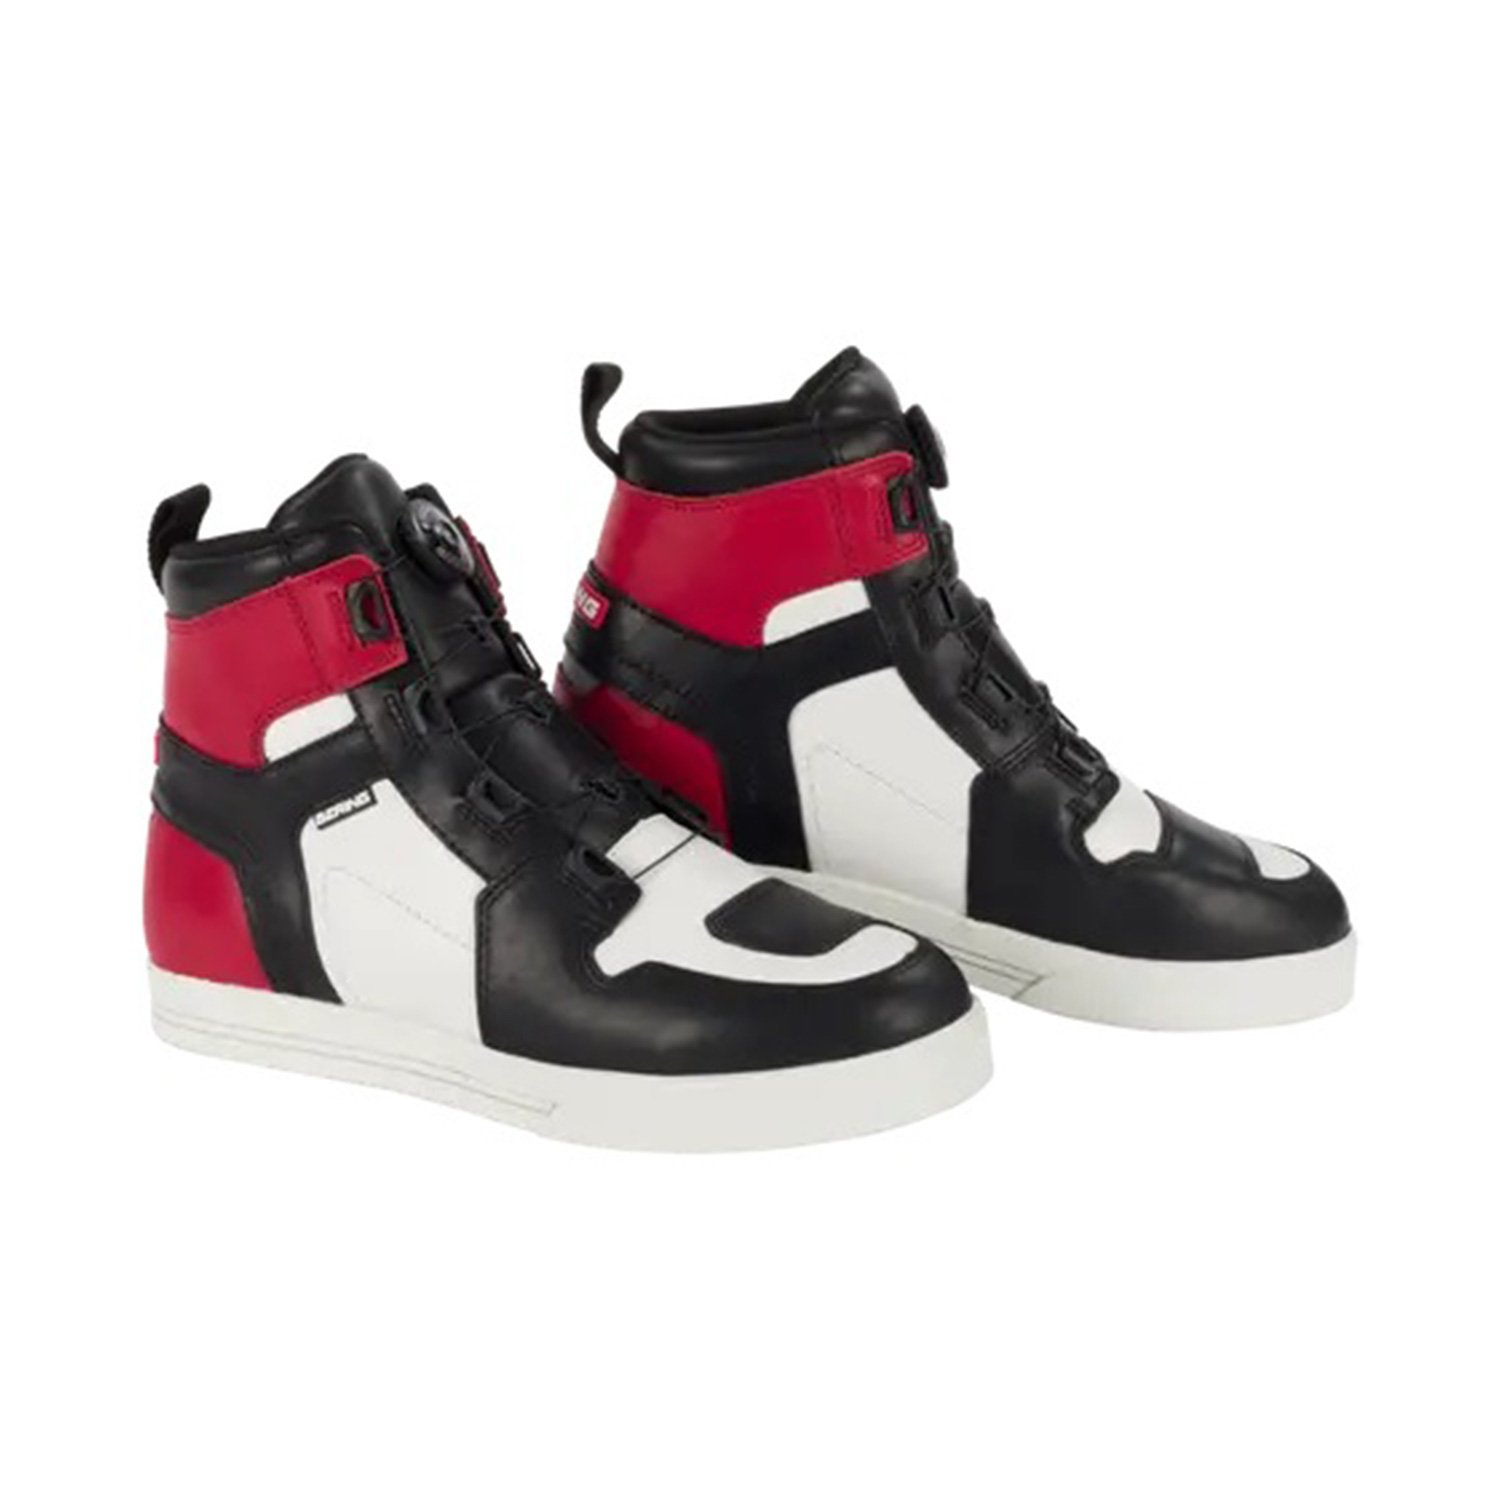 Image of Bering Sneakers Reflex A-Top Black White Red Size 45 ID 3660815176719